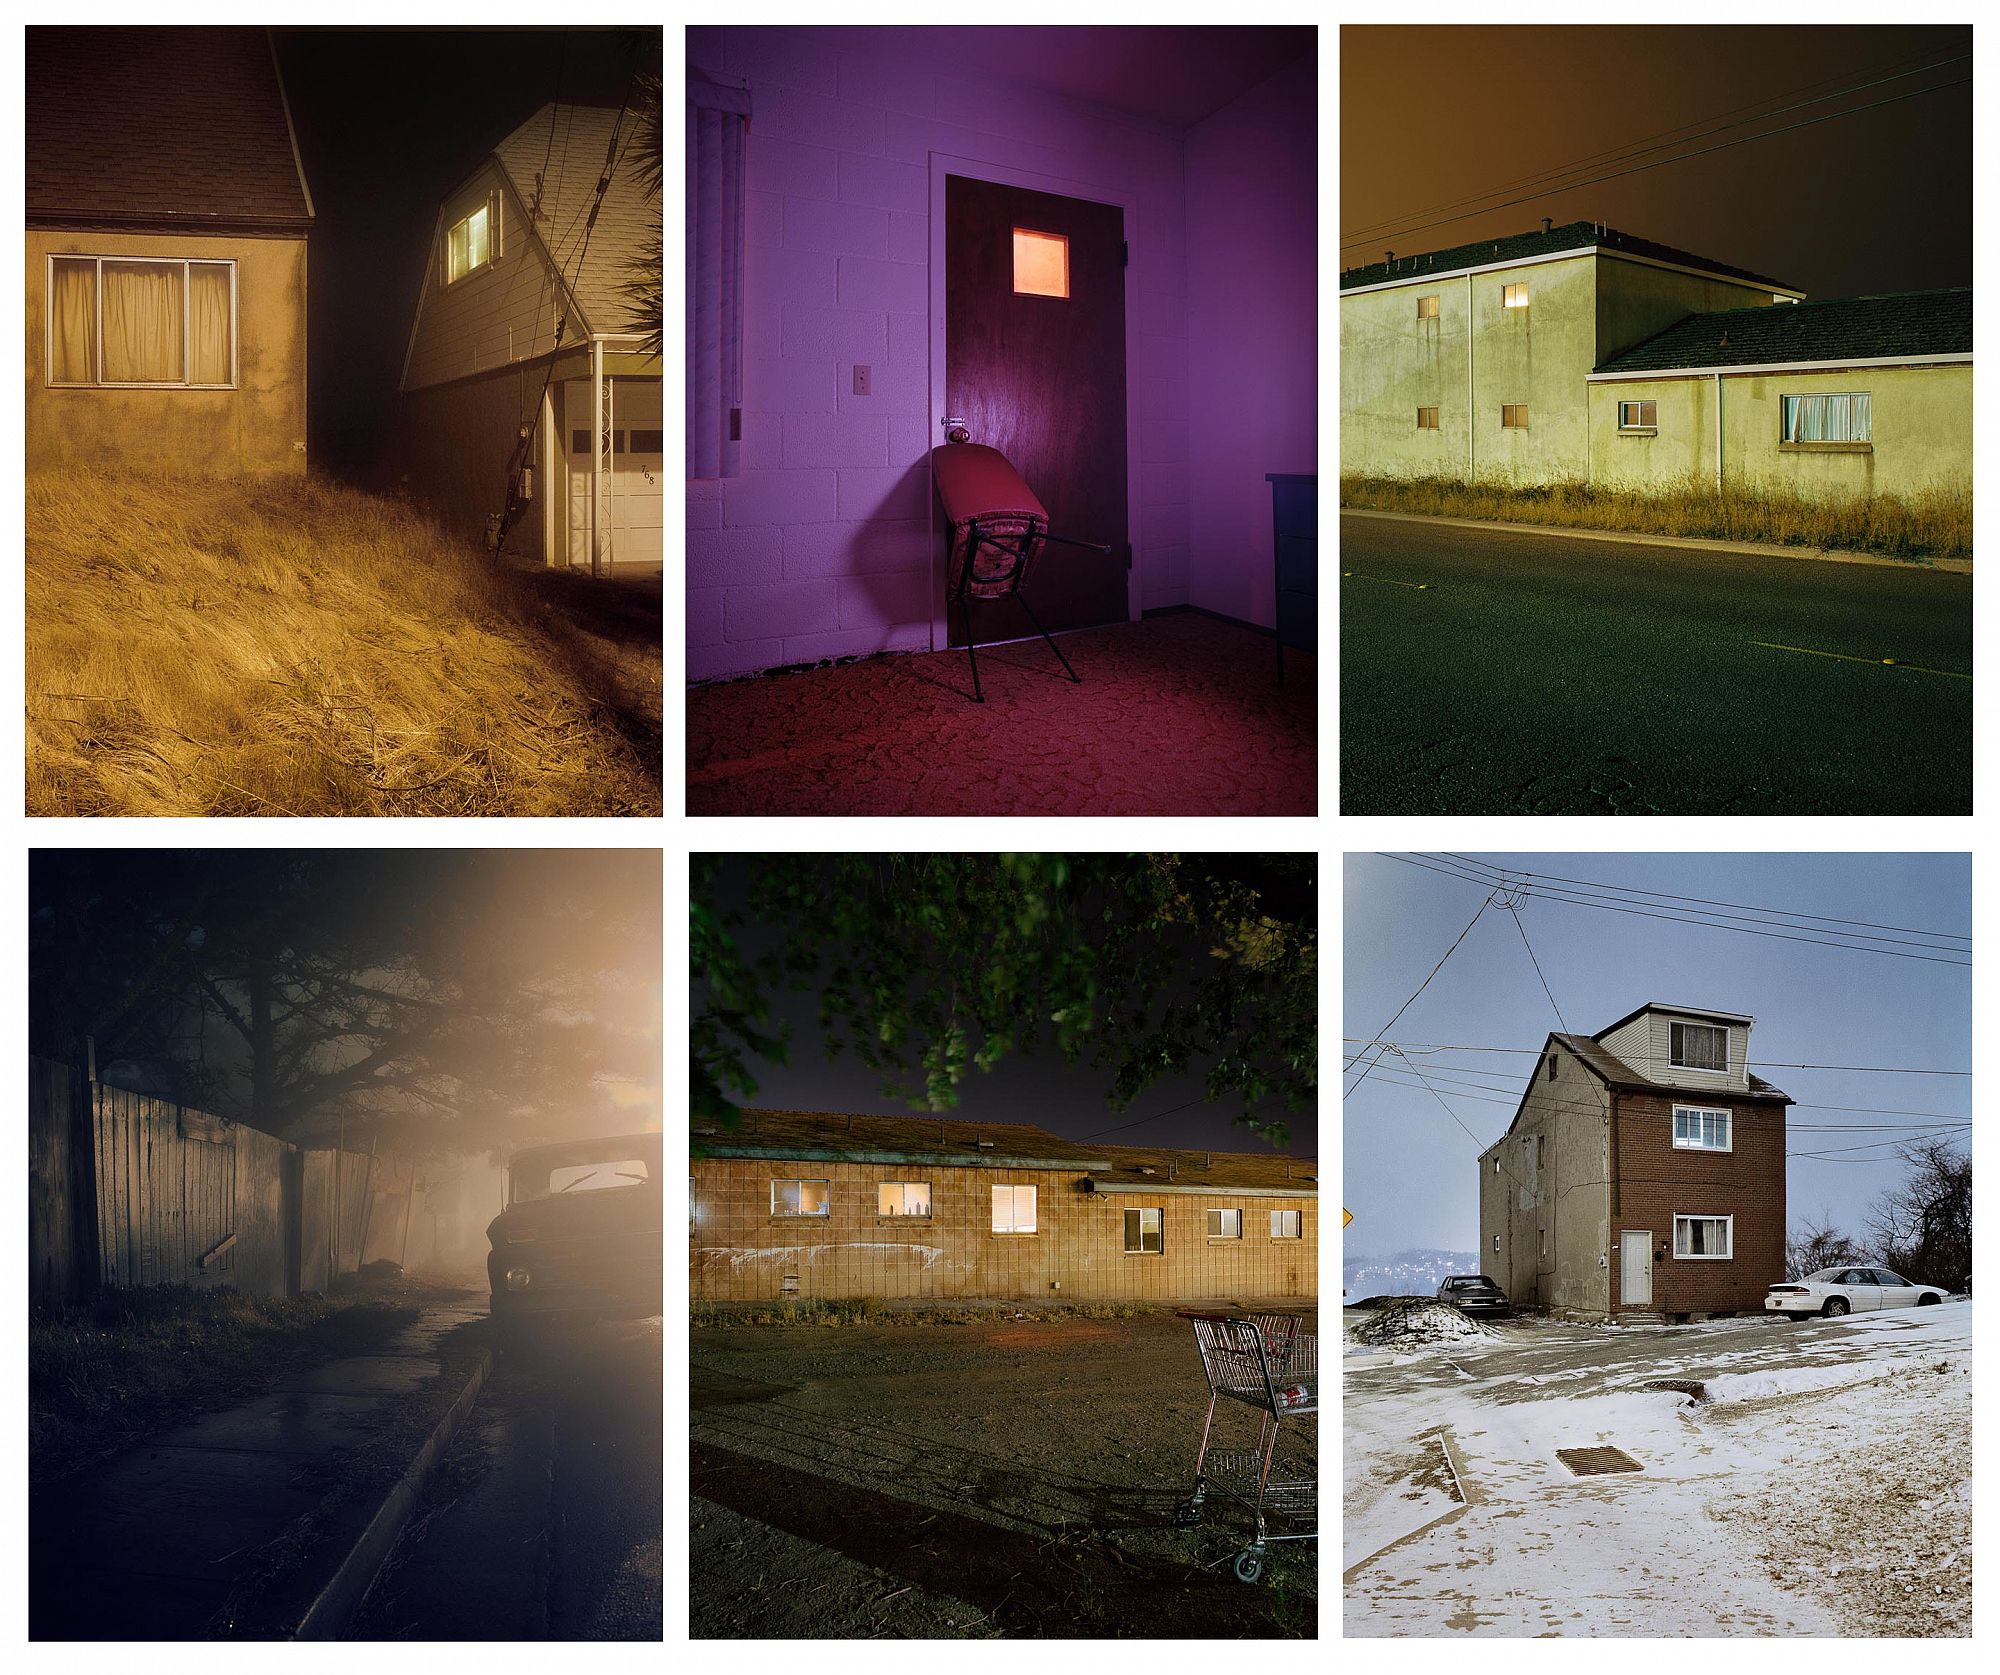 Todd Hido: House Hunting (Remastered Third Edition), Deluxe Limited Edition Suite (with 6 Archival Pigment Prints) [SIGNED]